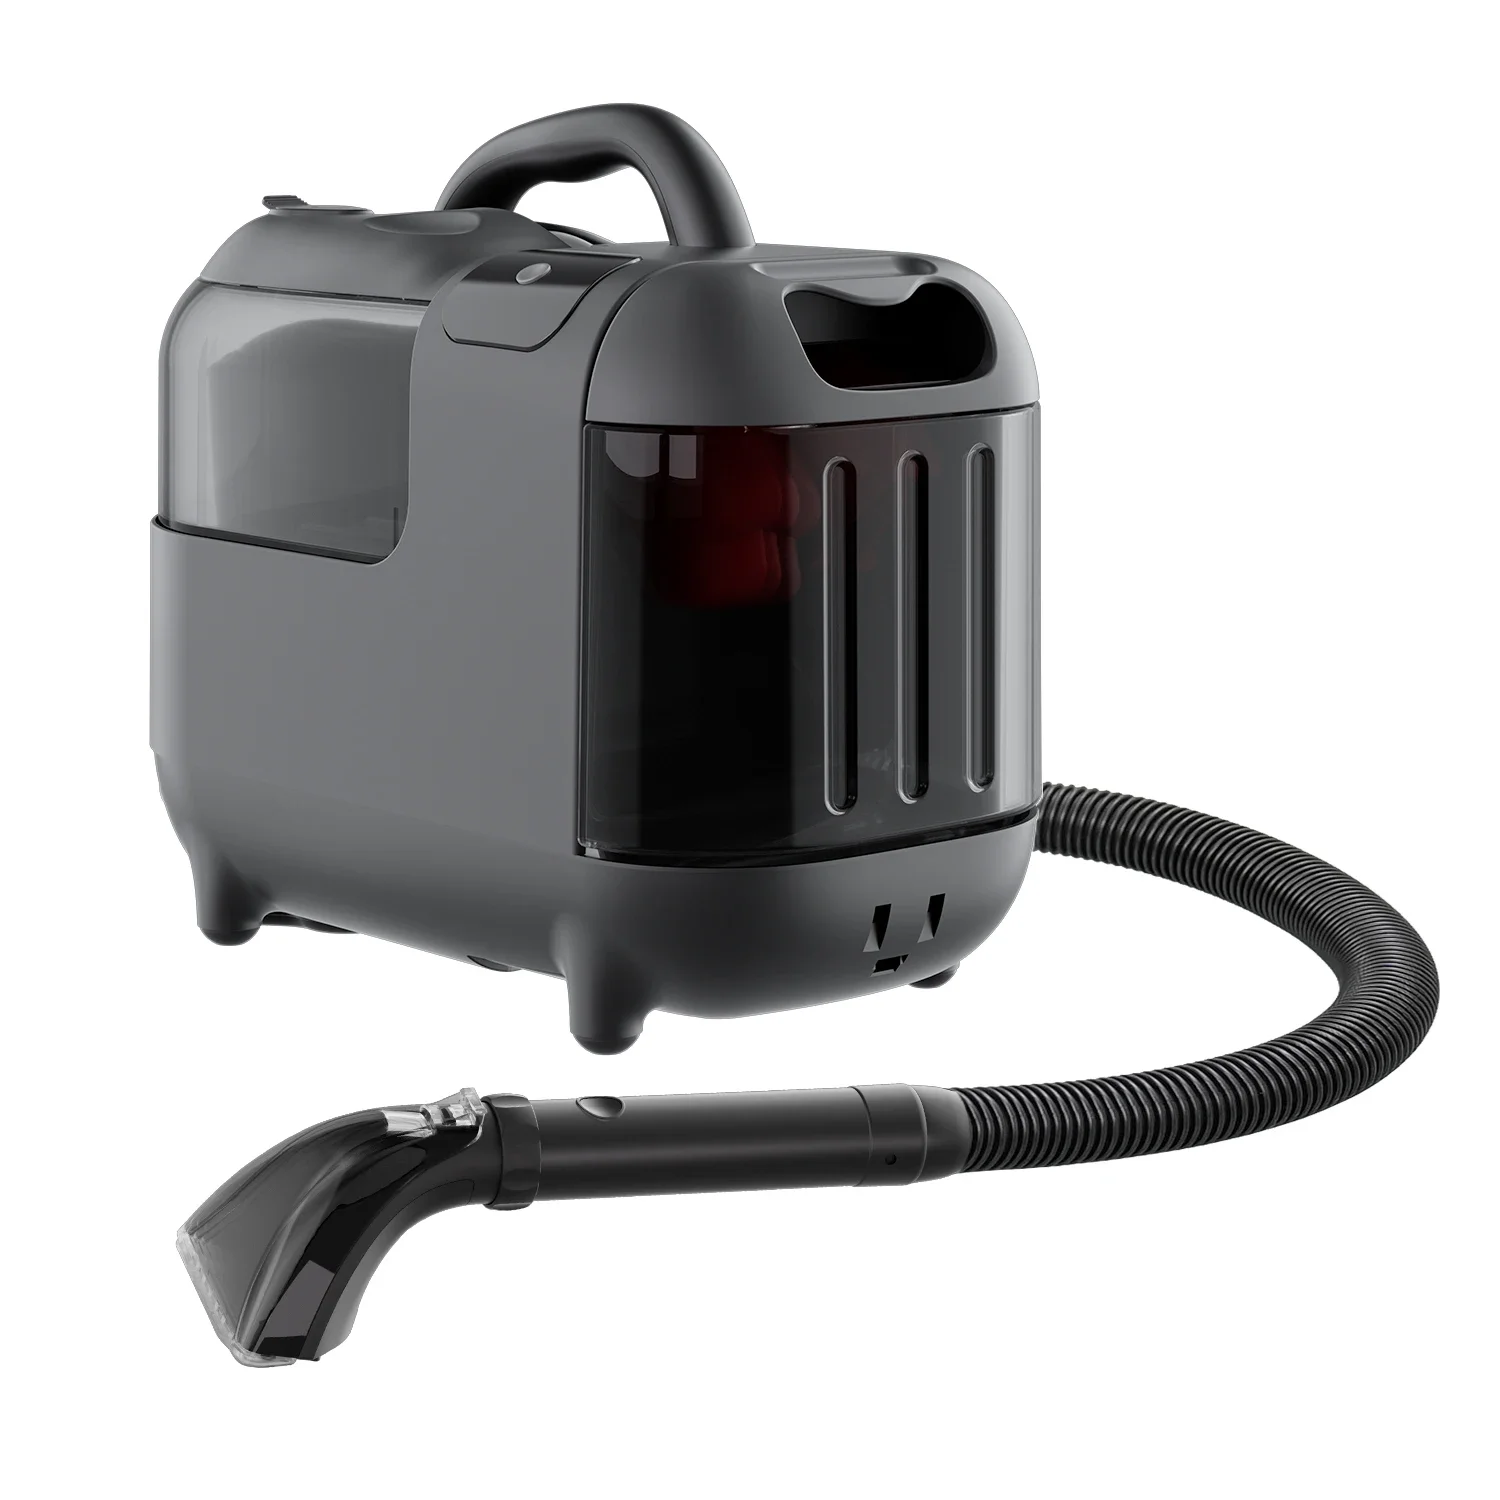 High Temperature Spot Cleaner Portable Car Wash Steam Cleaner Portable C... - $575.95